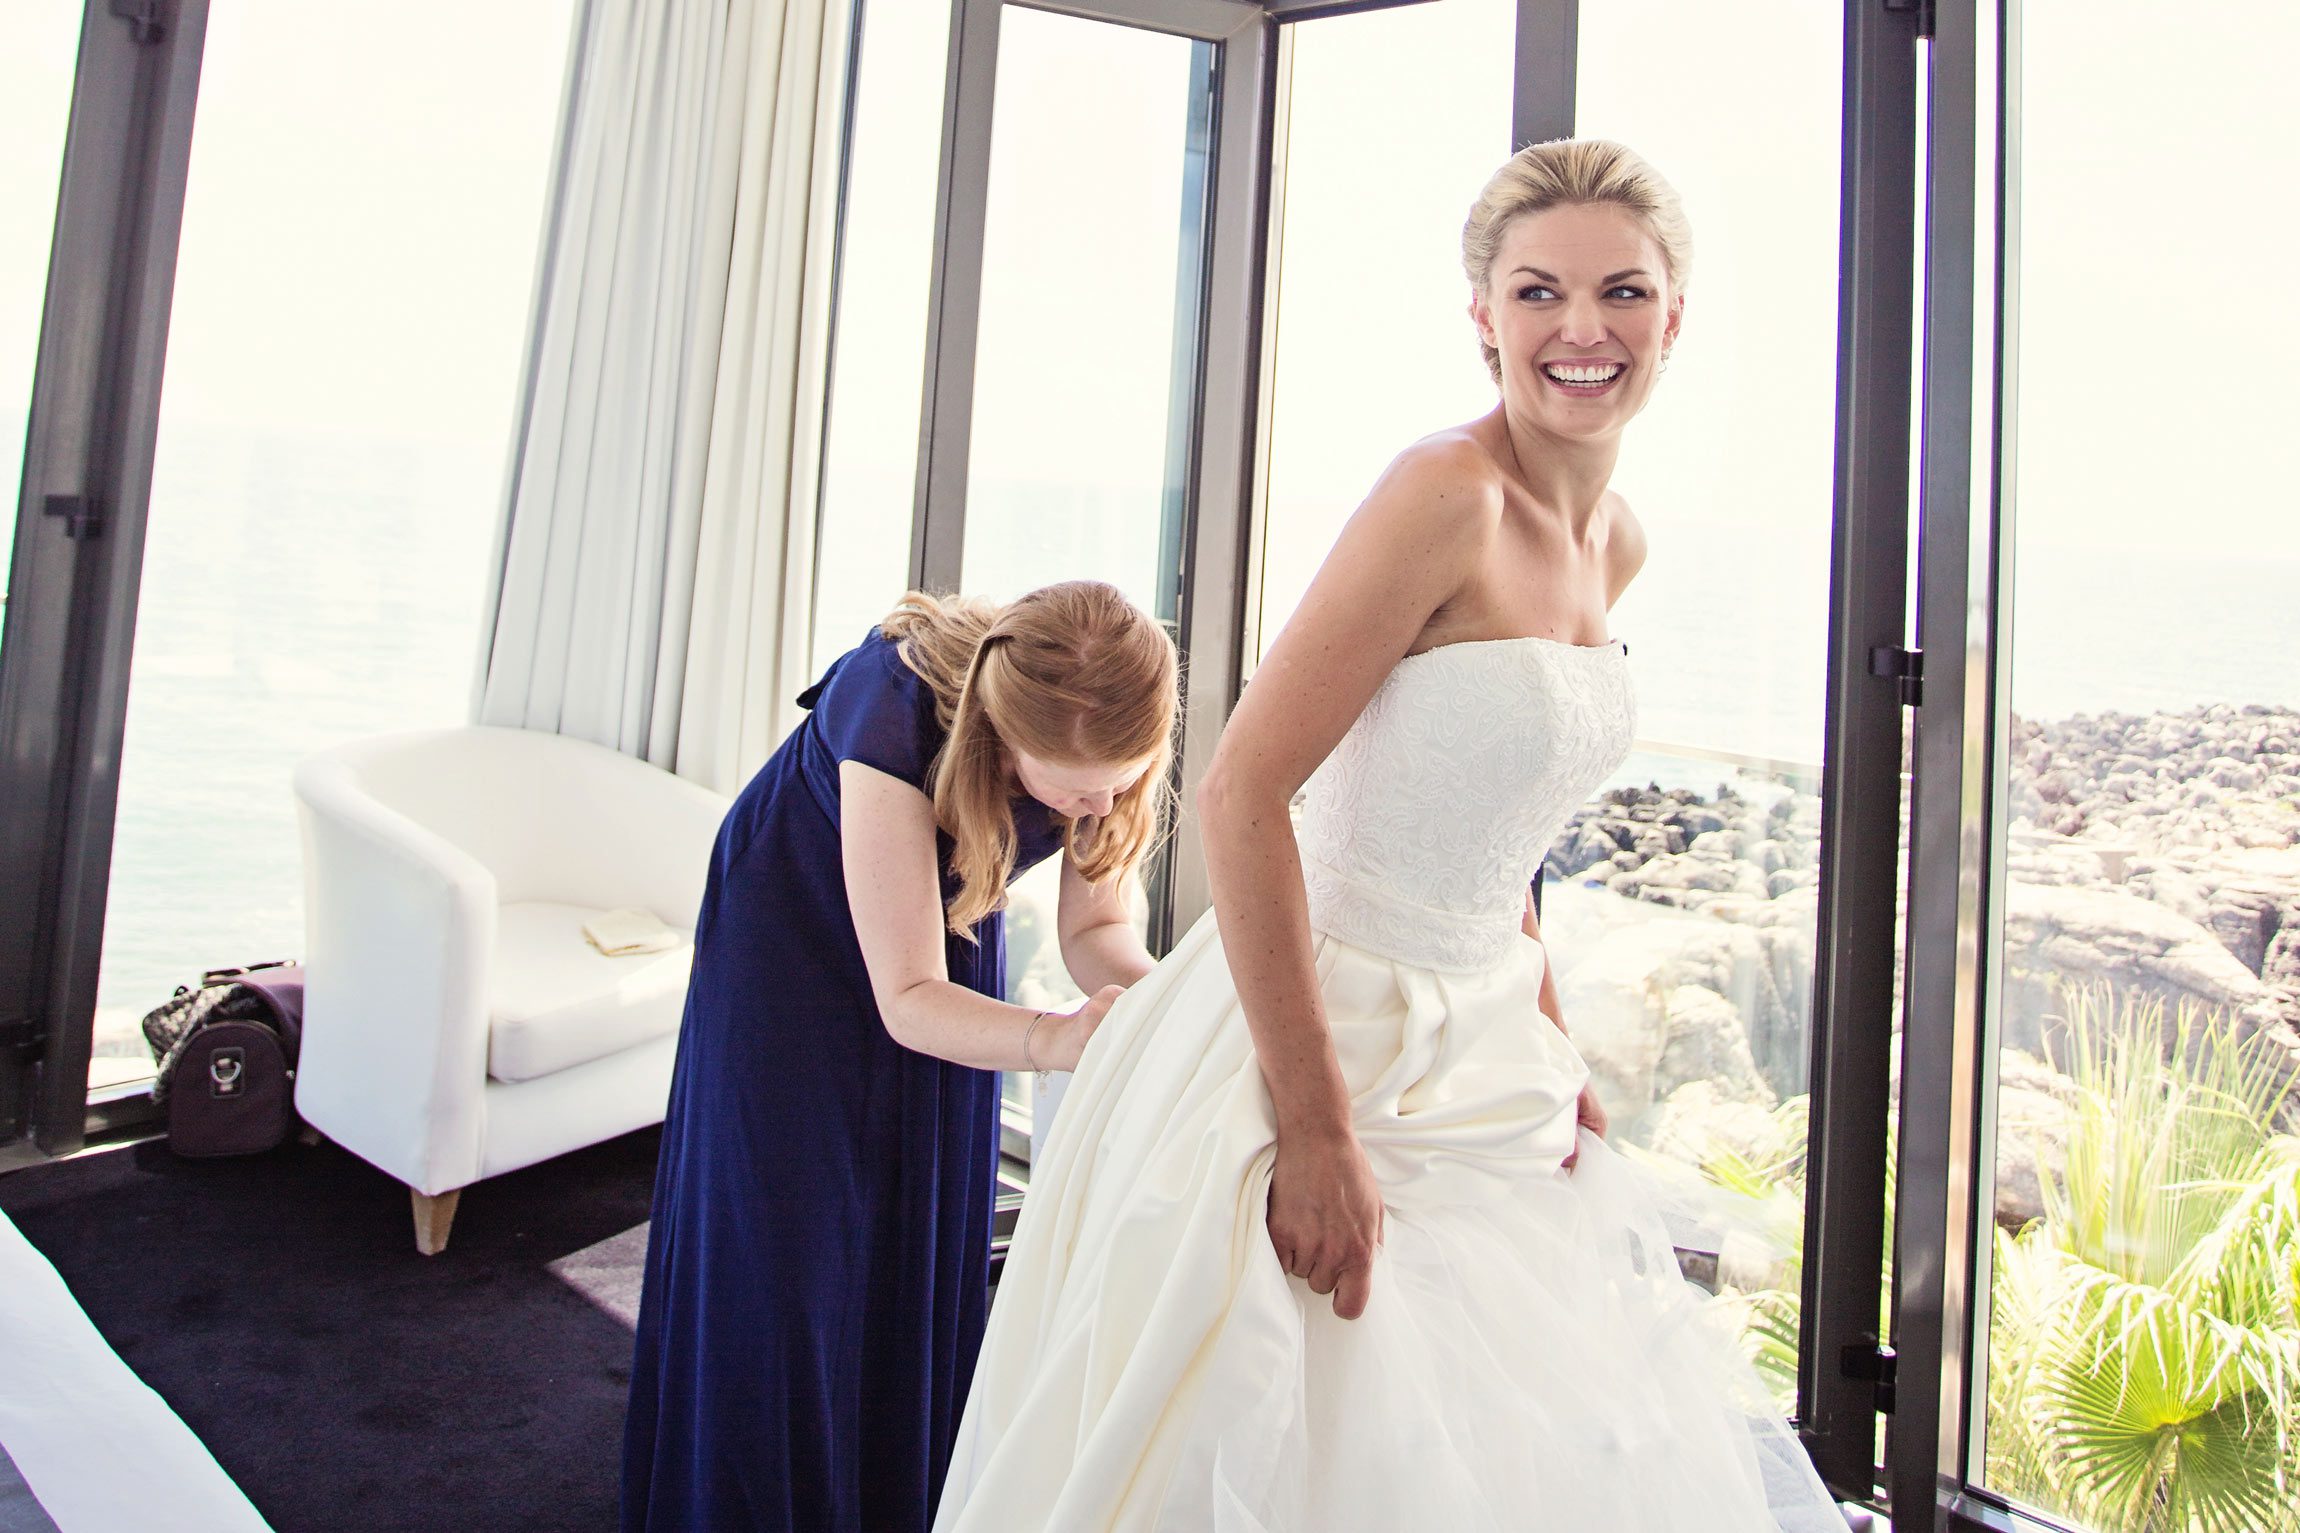 white bride getting her wedding dress on with the help of her sister